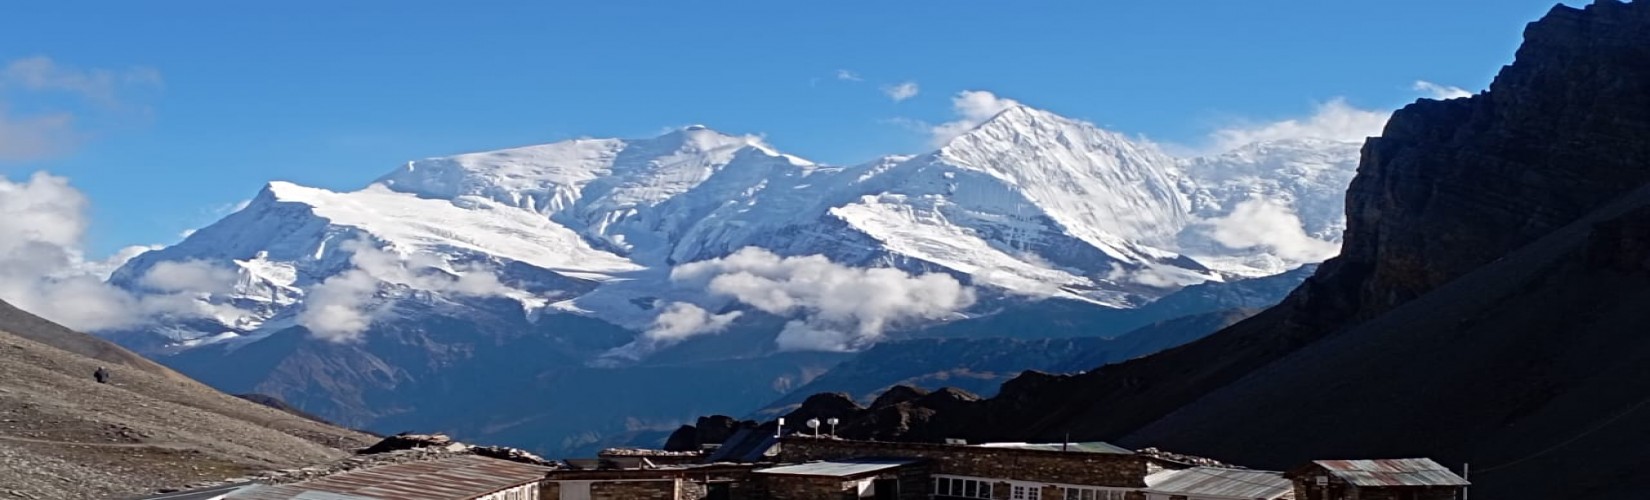 10 things to know about Annapurna Circuit Trek